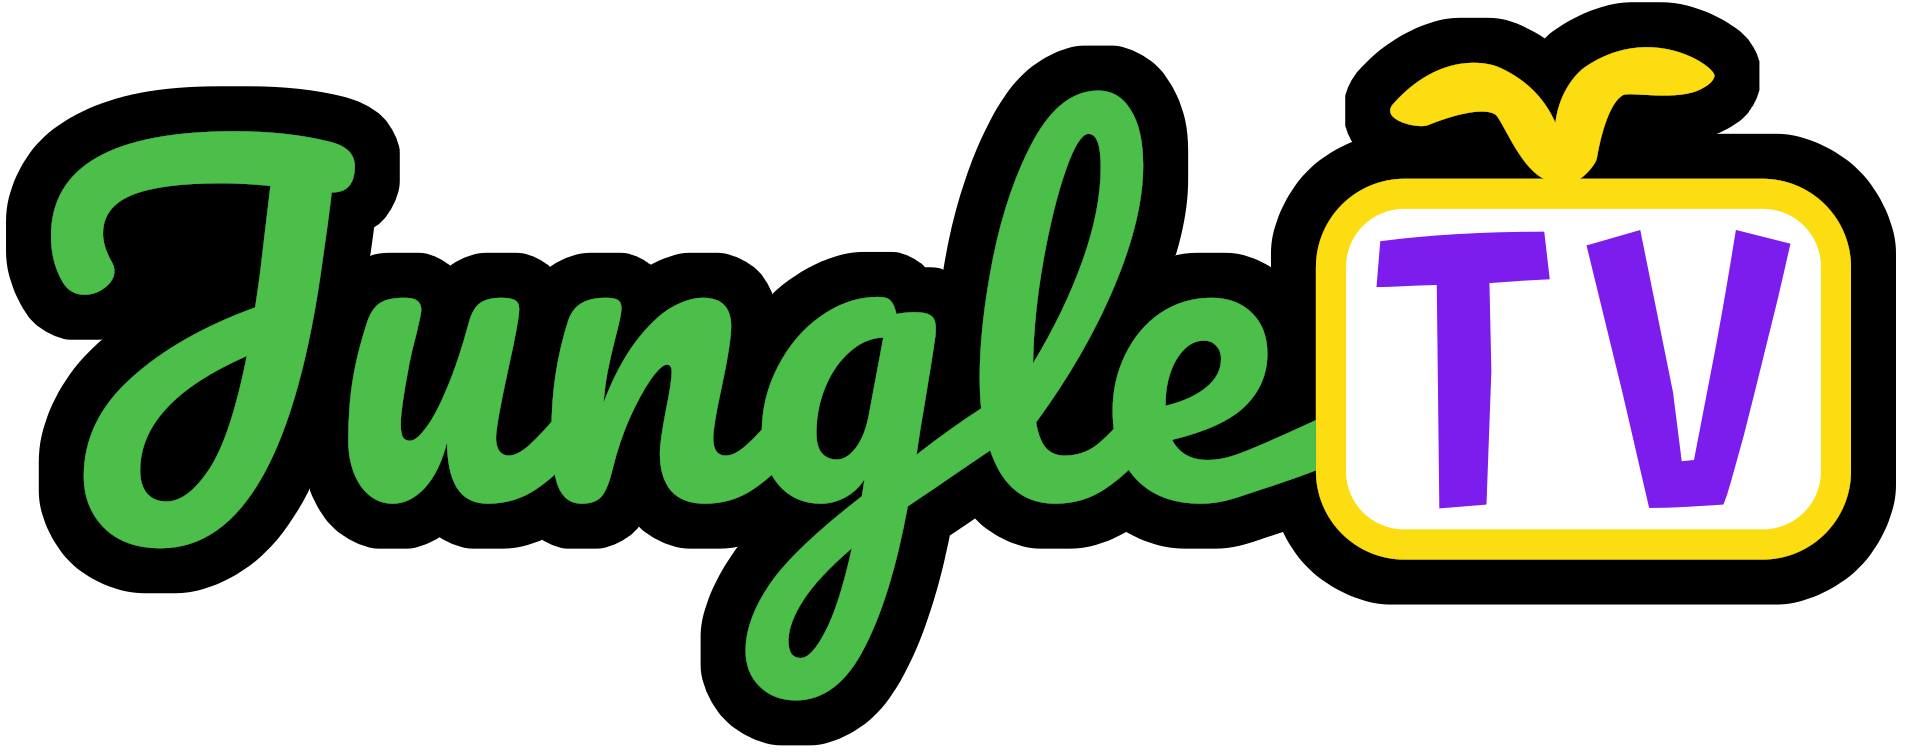 Featured BANANO Community Project: Jungle TV (Earn BANANO and NFTs by watching videos)